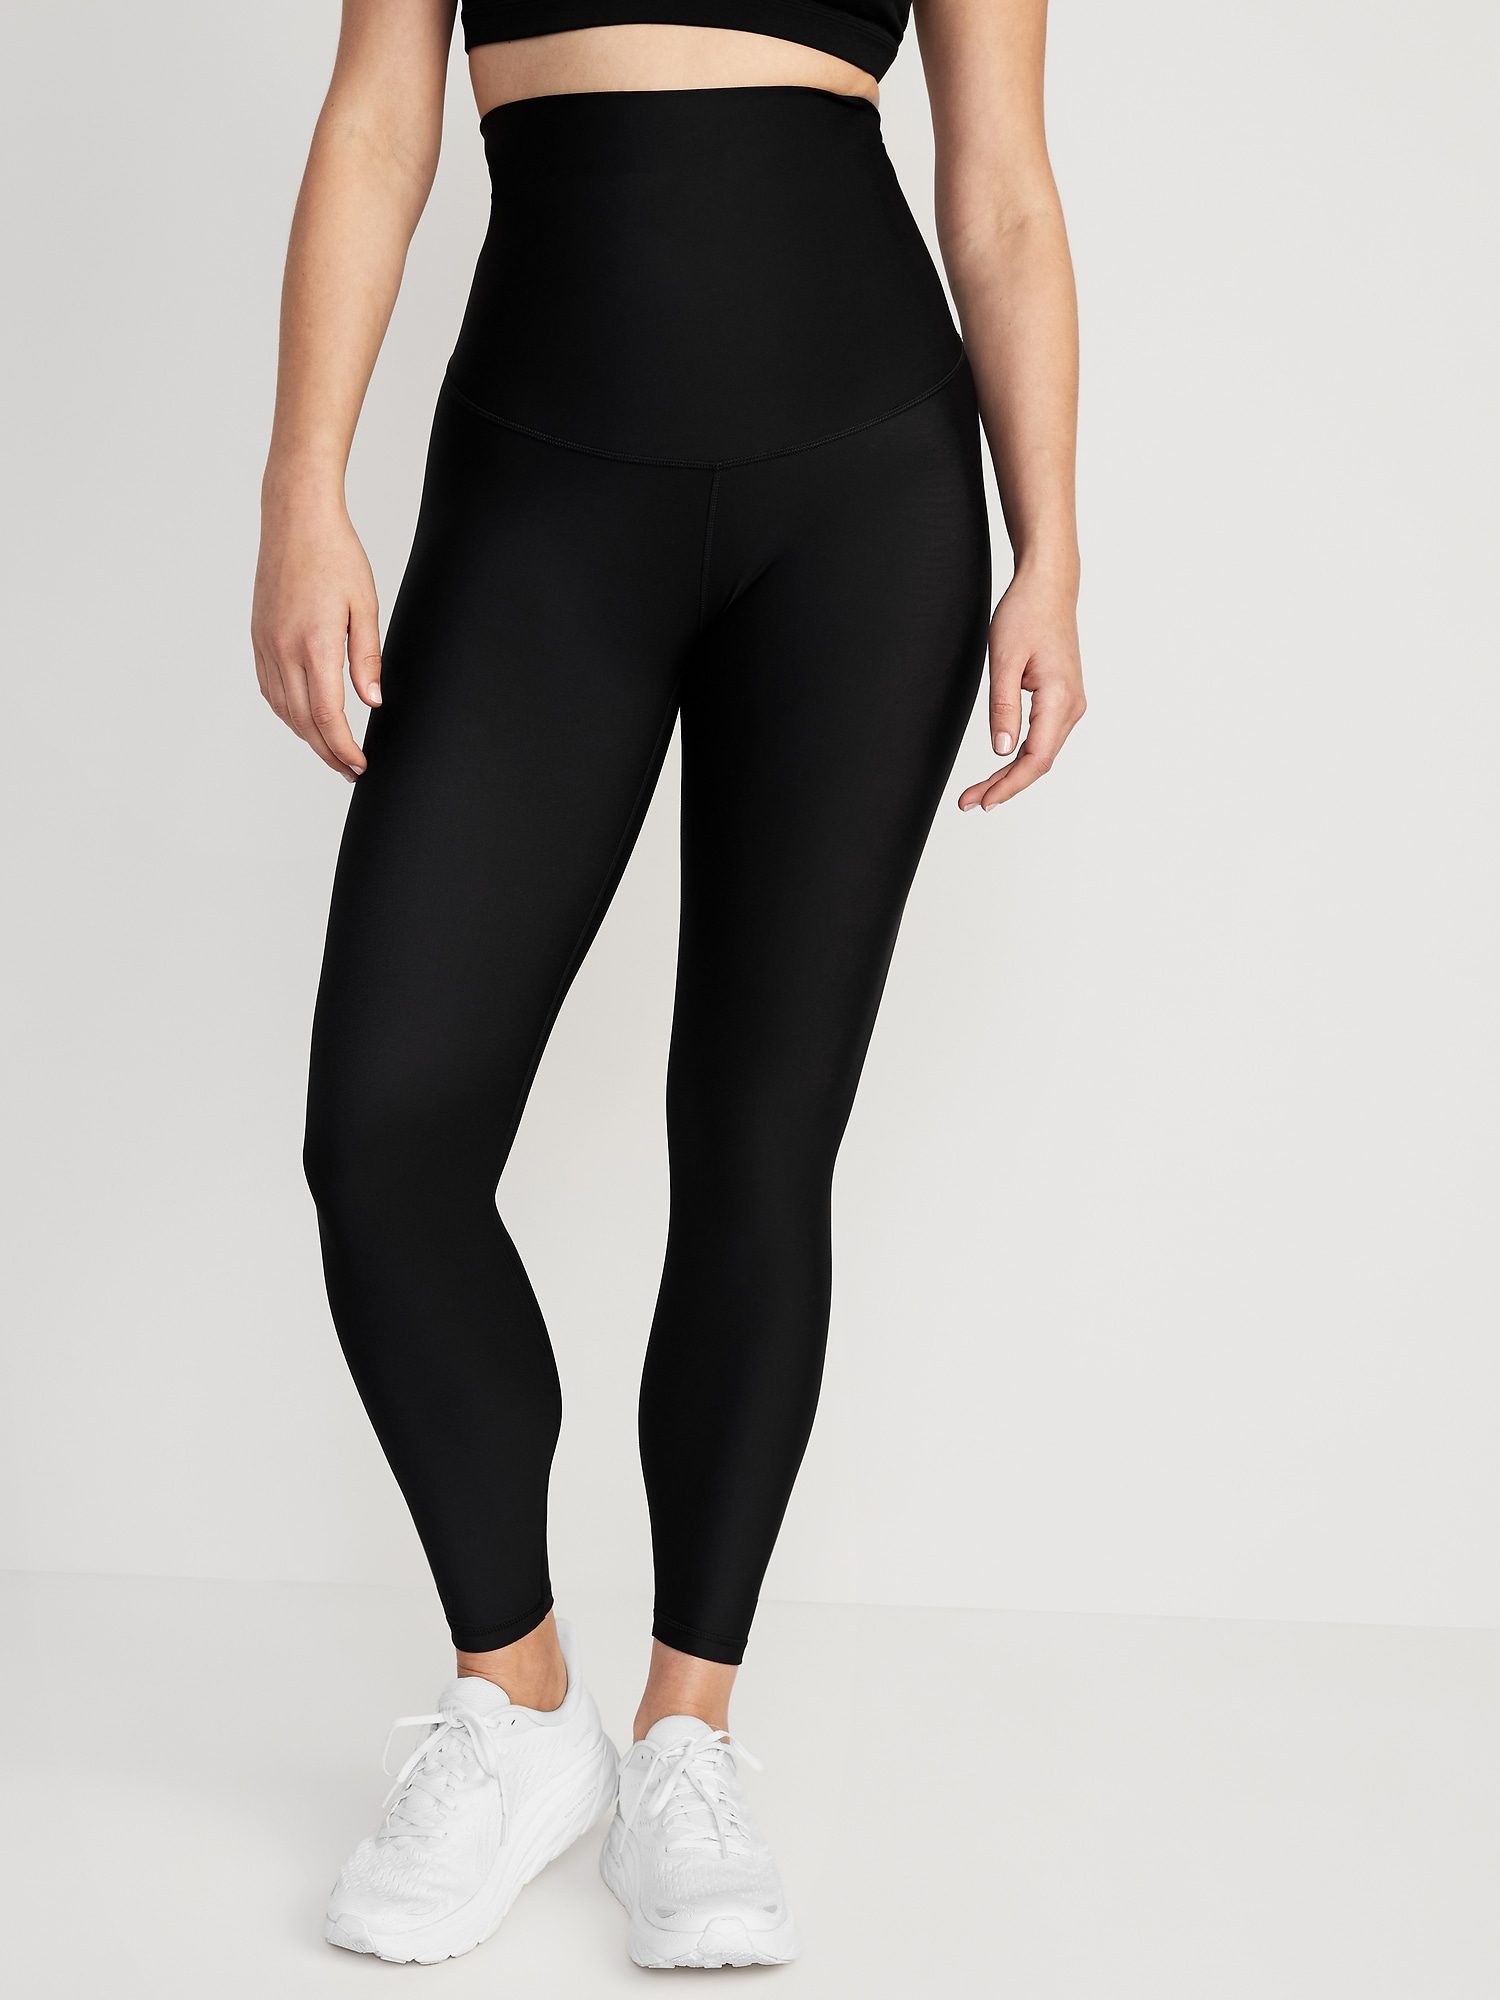 Women's Compression Leggings | Old Navy